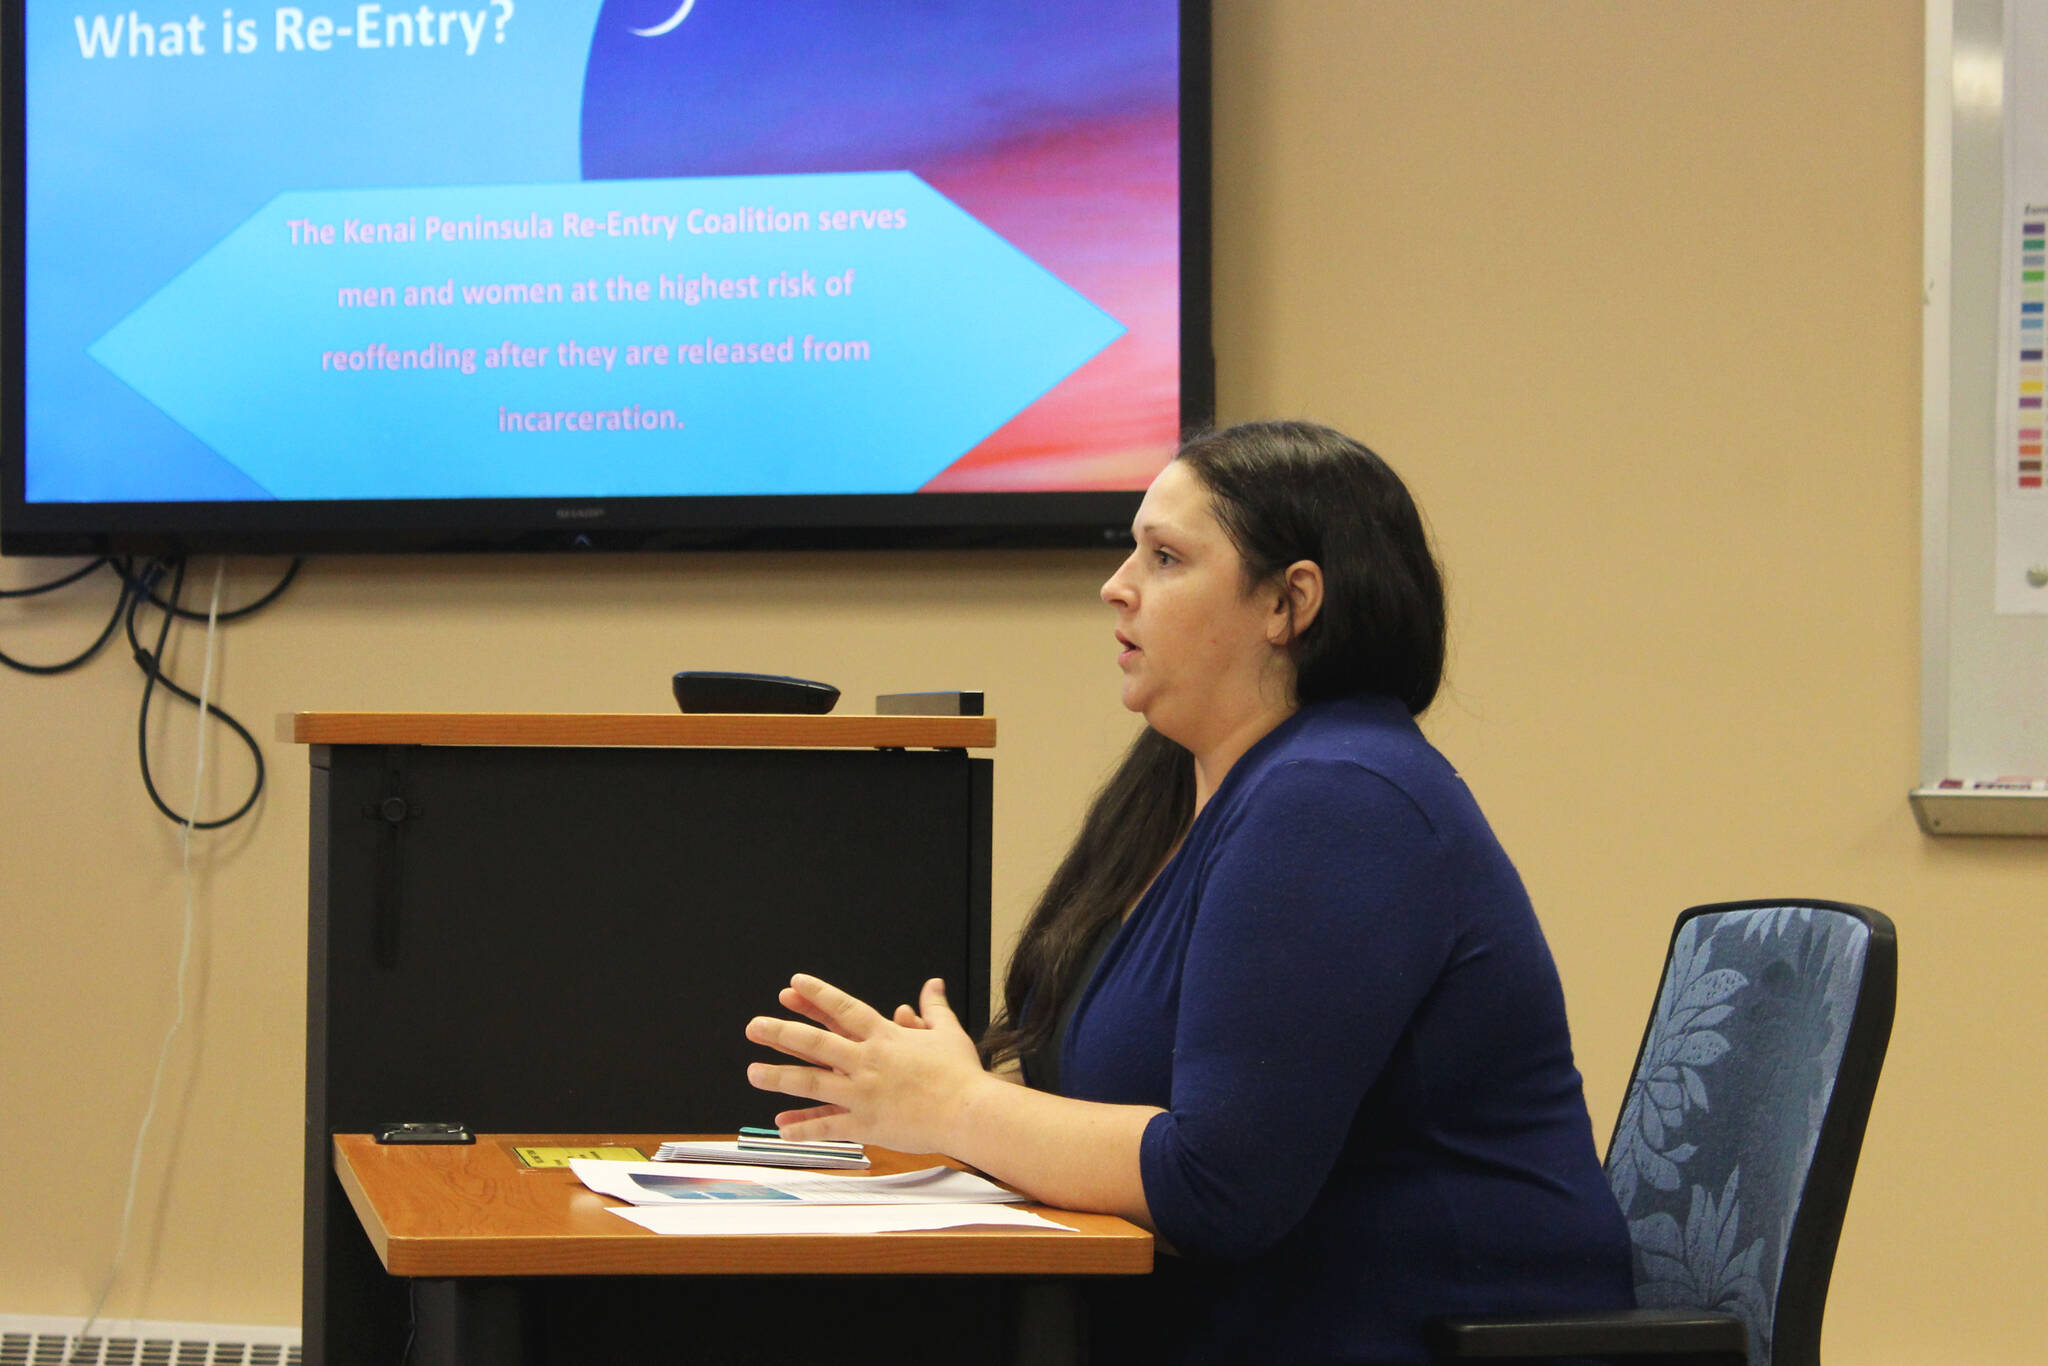 Kenai Peninsula Re-Entry Coalition President Katie Cowgill speaks about the organization’s reentry simulation event during a meeting of the Kenai City Council on Wednesday, March 16, 2022 in Kenai, Alaska. (Ashlyn O’Hara/Peninsula Clarion)